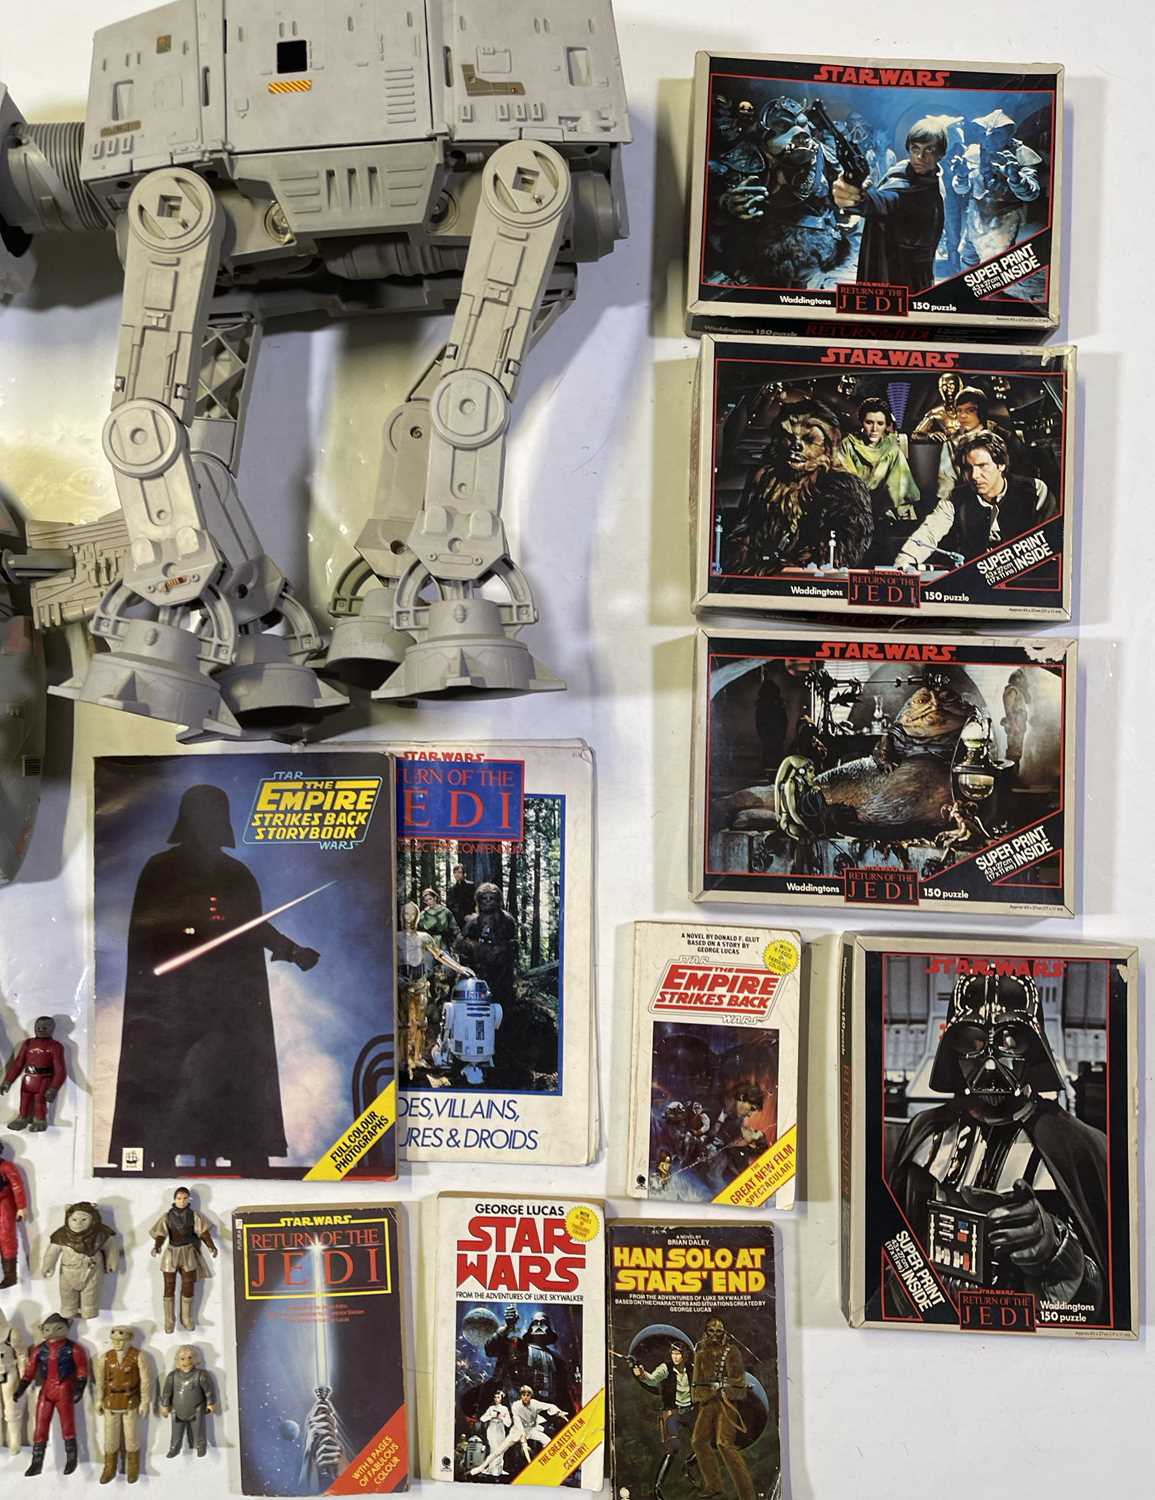 STAR WARS - LARGE COLLECTION OF ORIGINAL KENNER FIGURINES. - Image 5 of 5